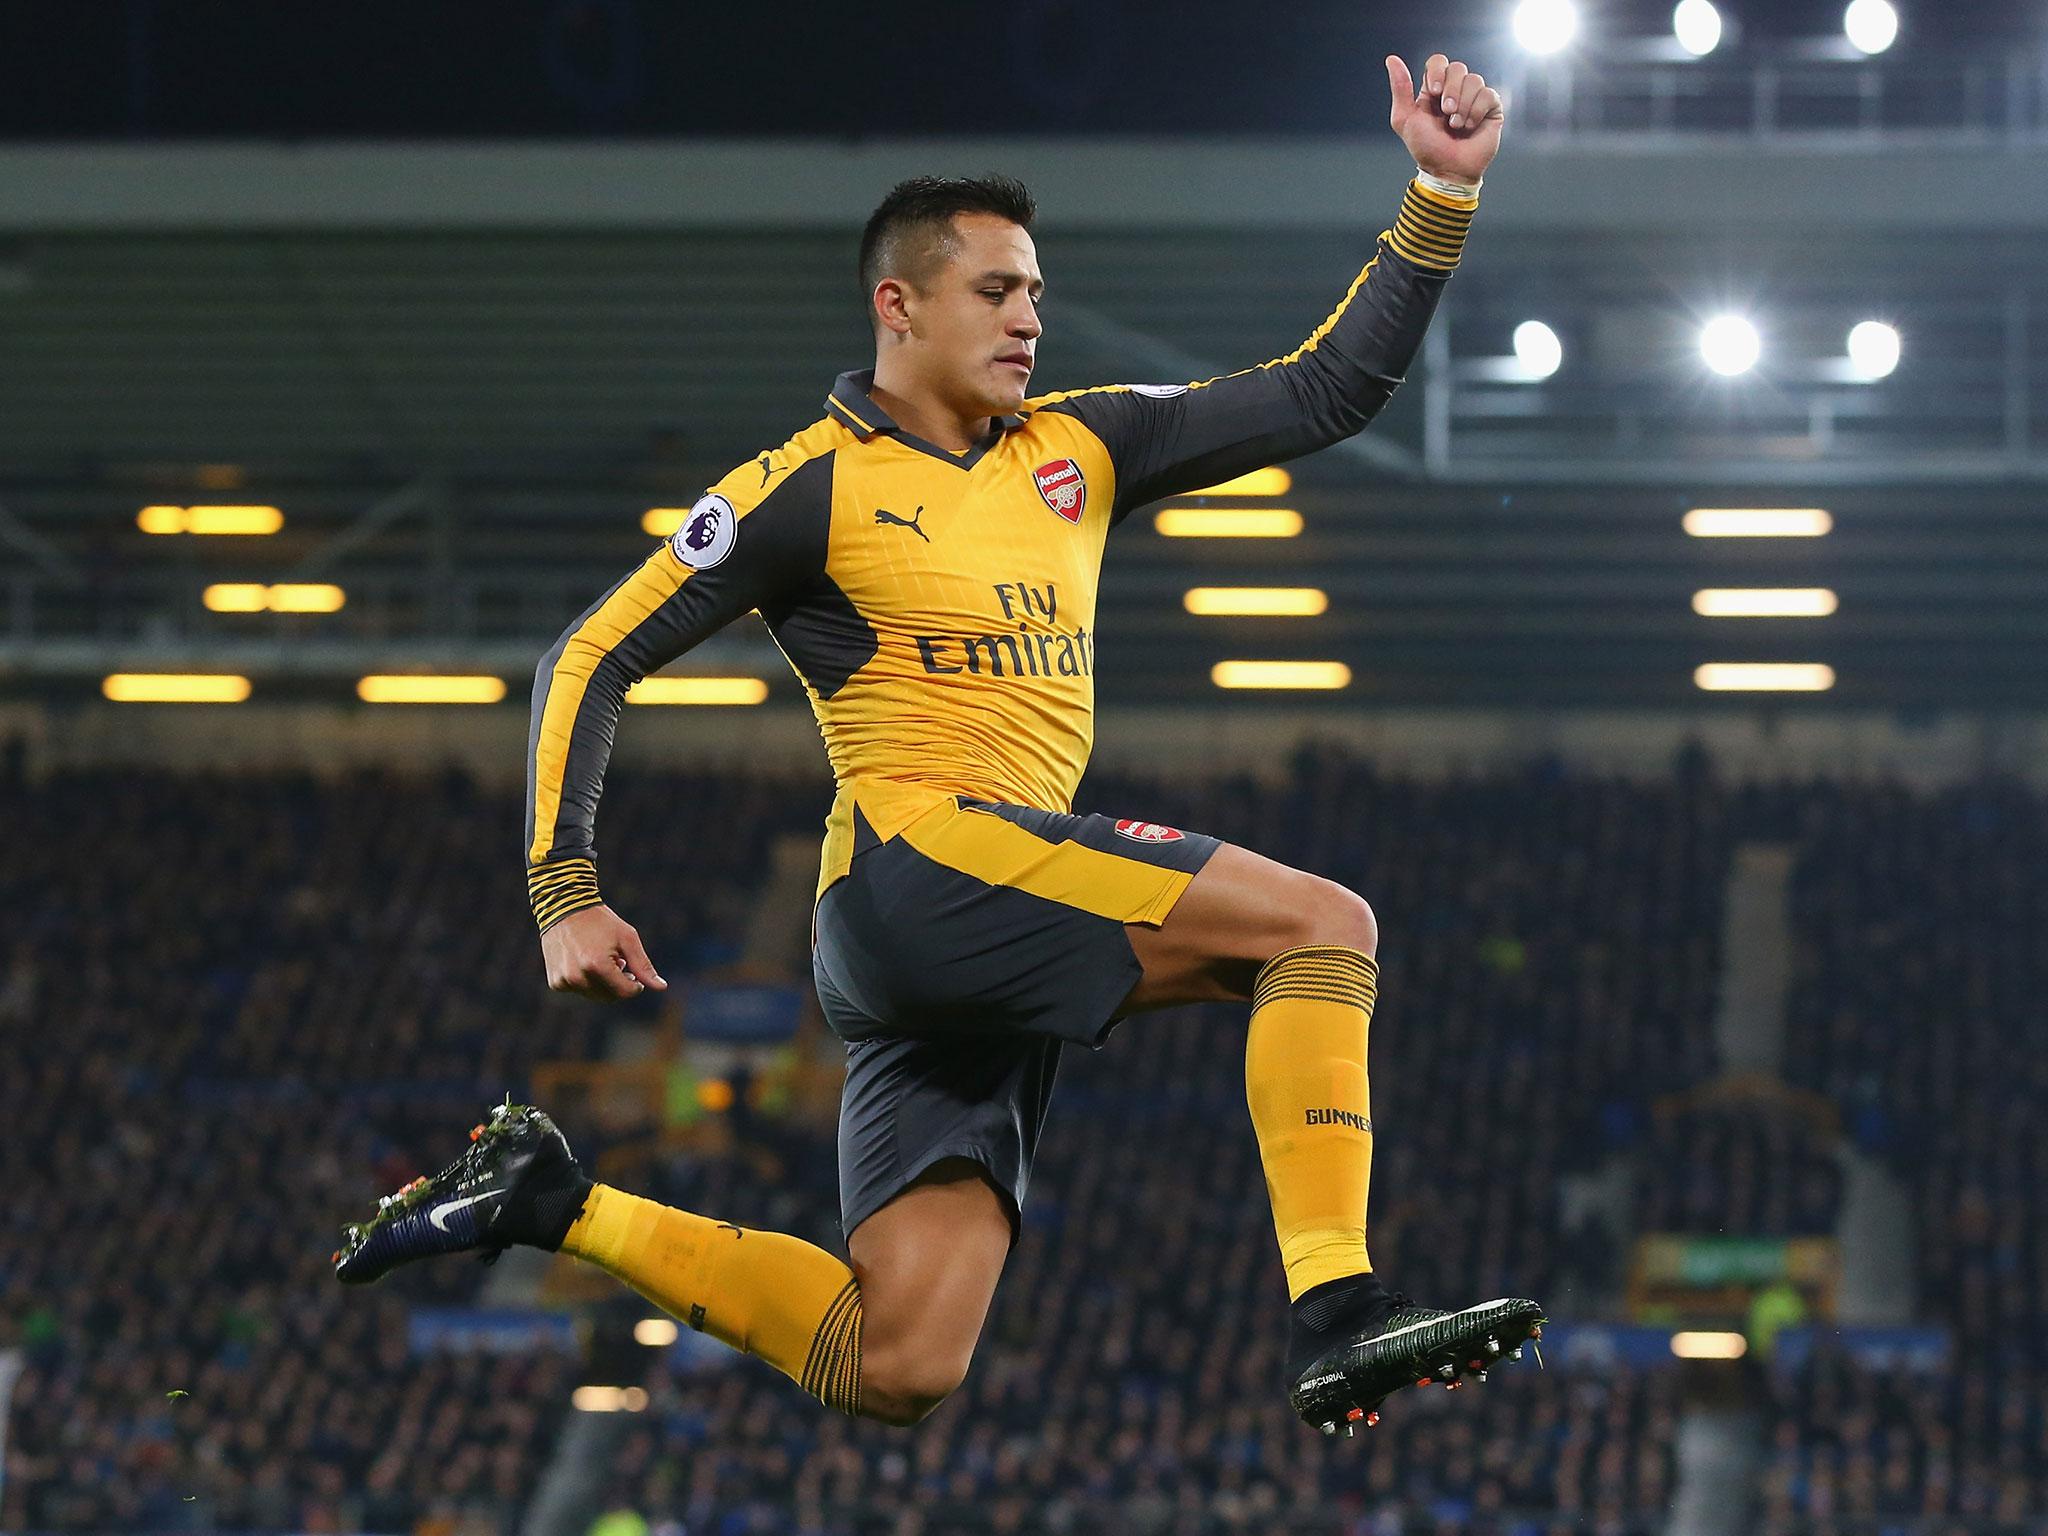 Alexis Sanchez looks set to reject Arsenal's latest contract offer in an effort to hold out for higher wages